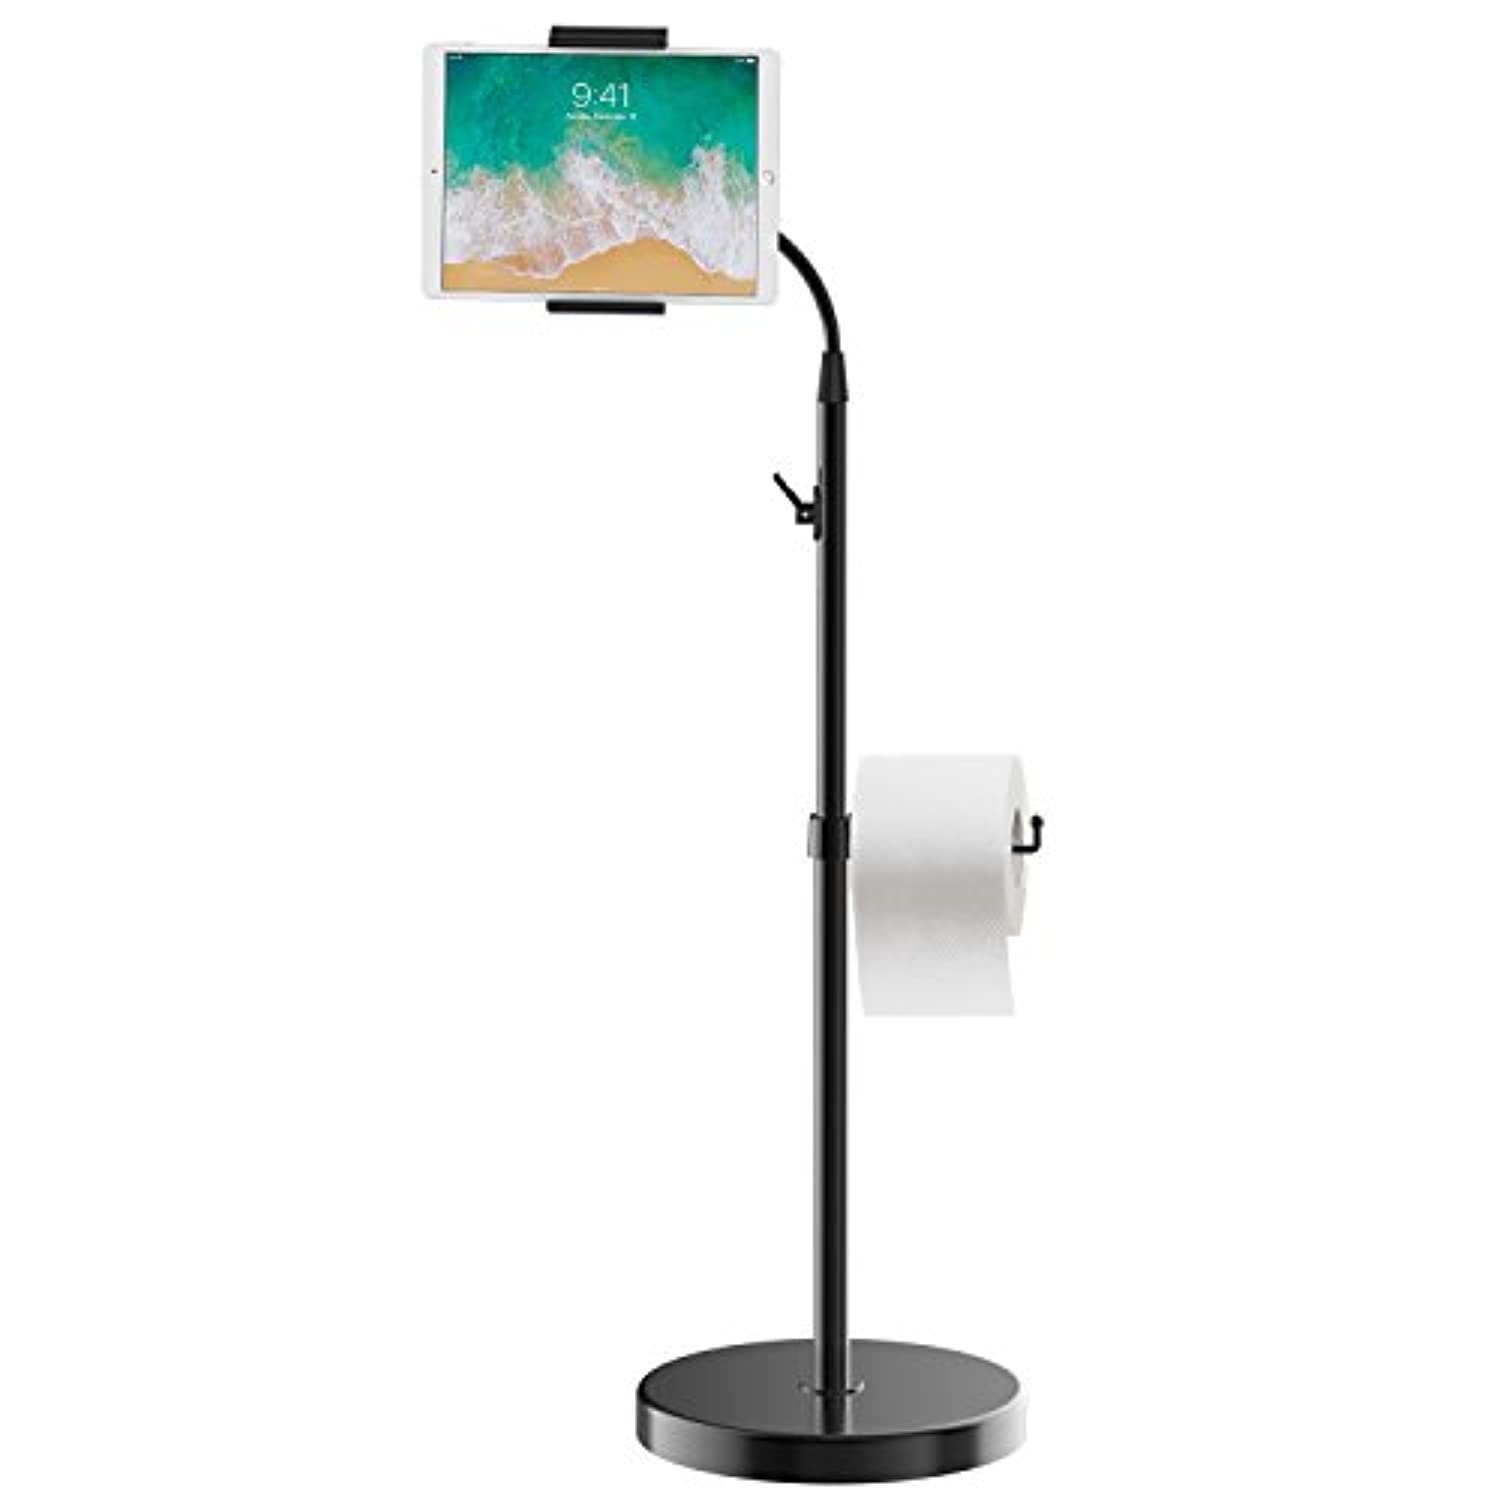 JeTeK Floor Stand Height-Adjustable Gooseneck with Toilet Paper Roll Holder for 7-11.8 Inch Tablets iPad Galaxy Tab